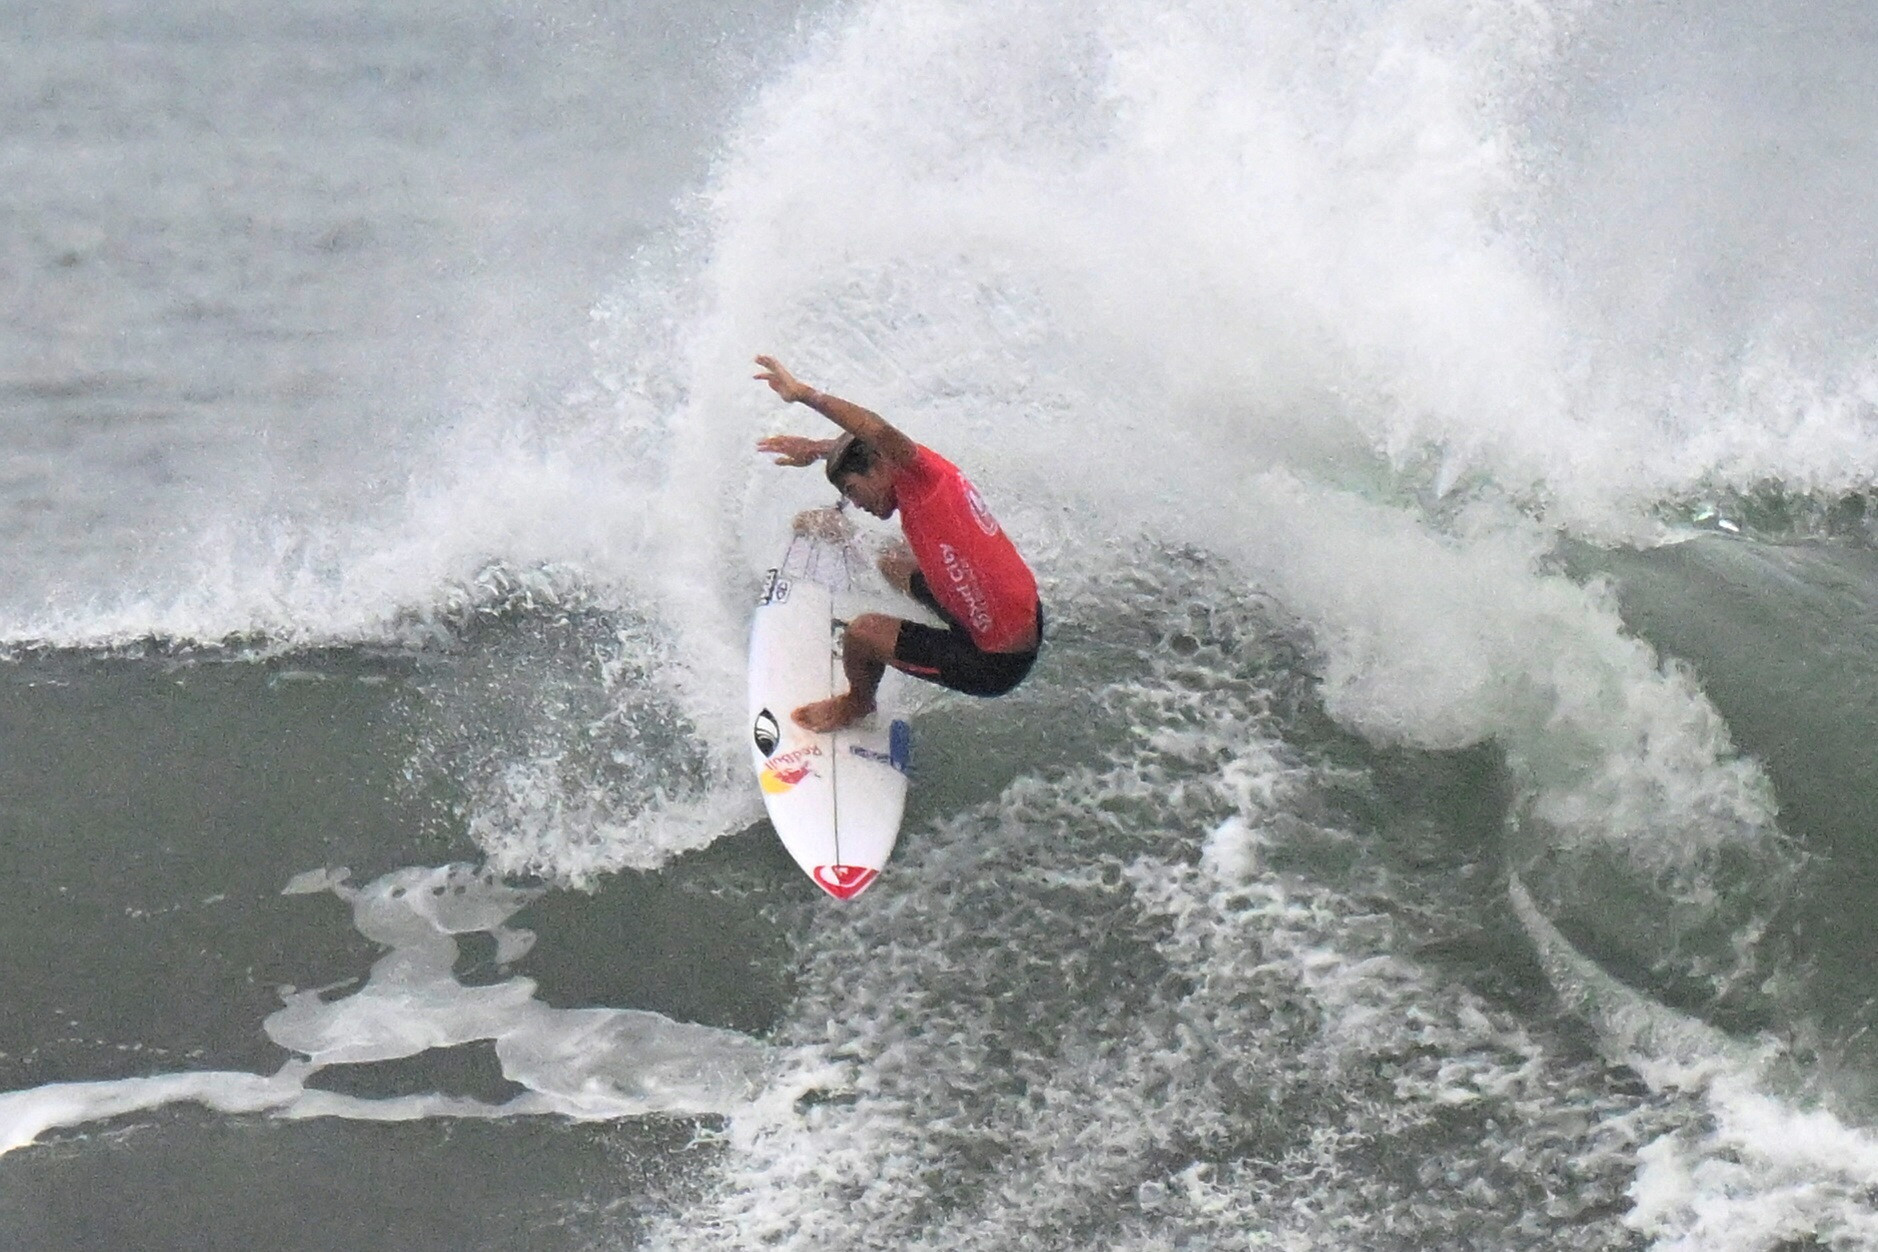 Igarashi and Vaast earn Paris 2024 spots on last day of World Surfing Games